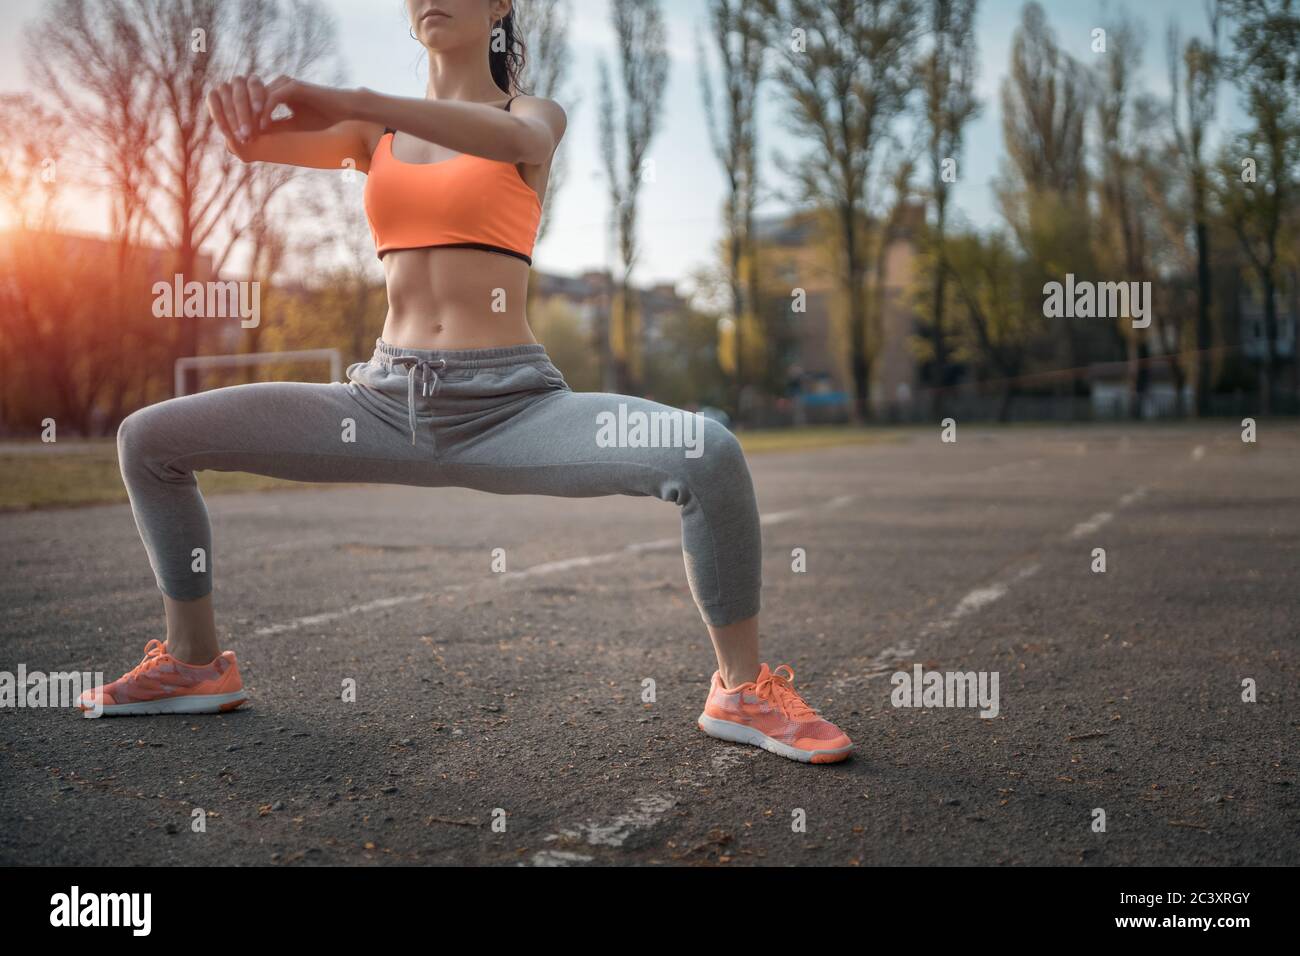 Girls Buttocks In Tight Leggings. Summer Workout On Athletic Track On  Stadium. Skinny Female Sportsman Is Doing Stretching Exercises To Be  Fitted. Stock Photo, Picture and Royalty Free Image. Image 125852145.